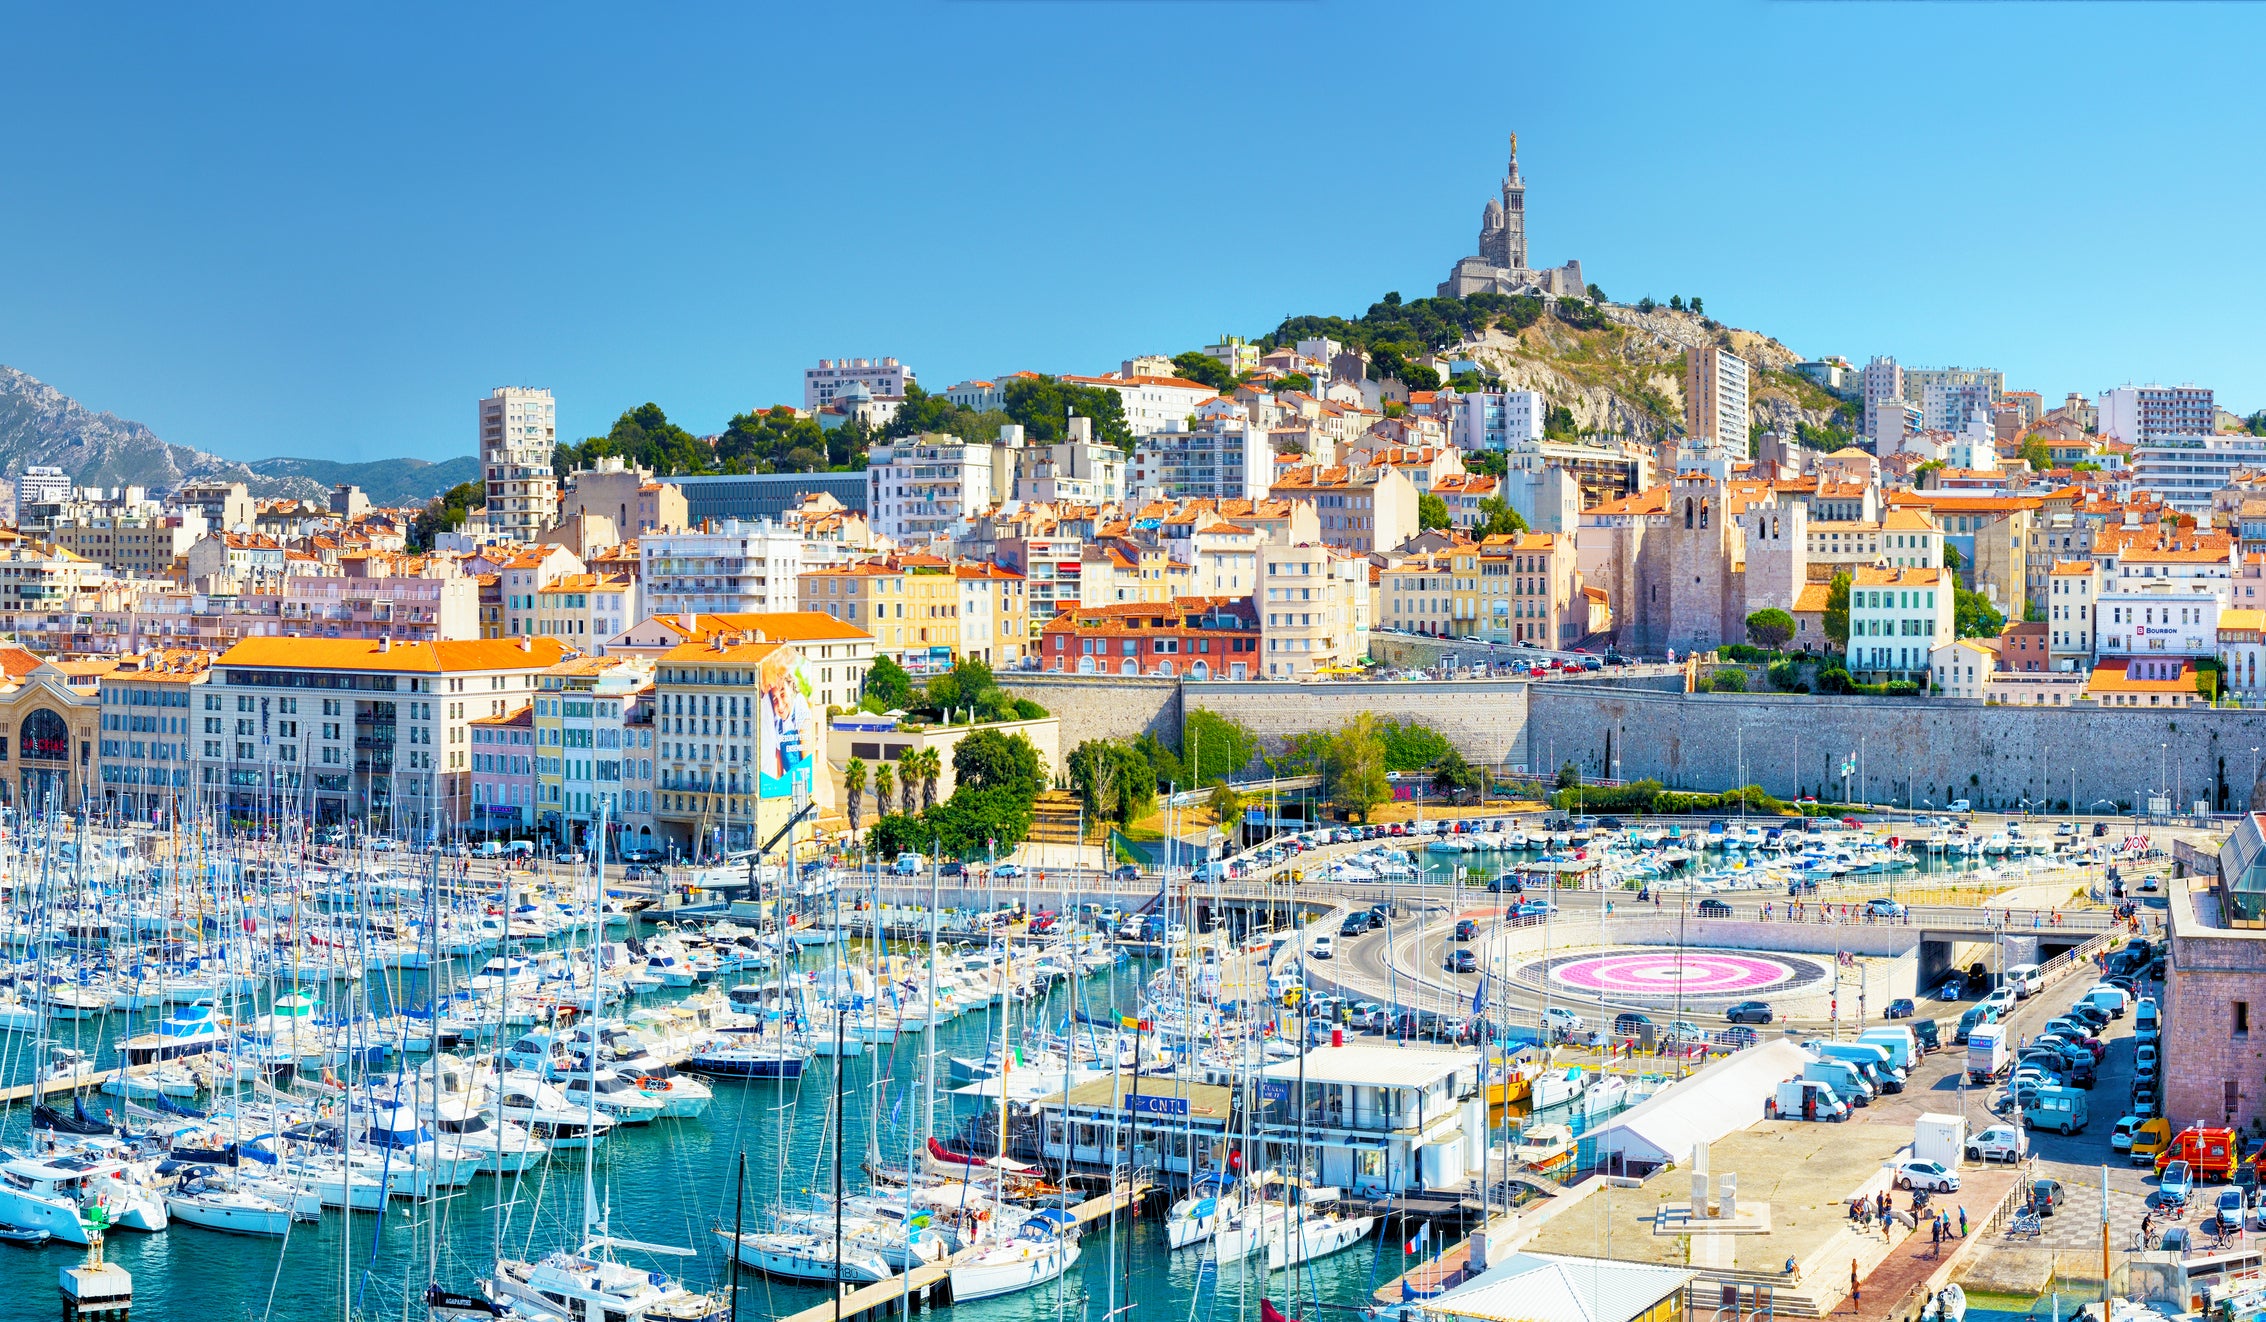 Marseille will host football and sailing sessions at this summer’s Games